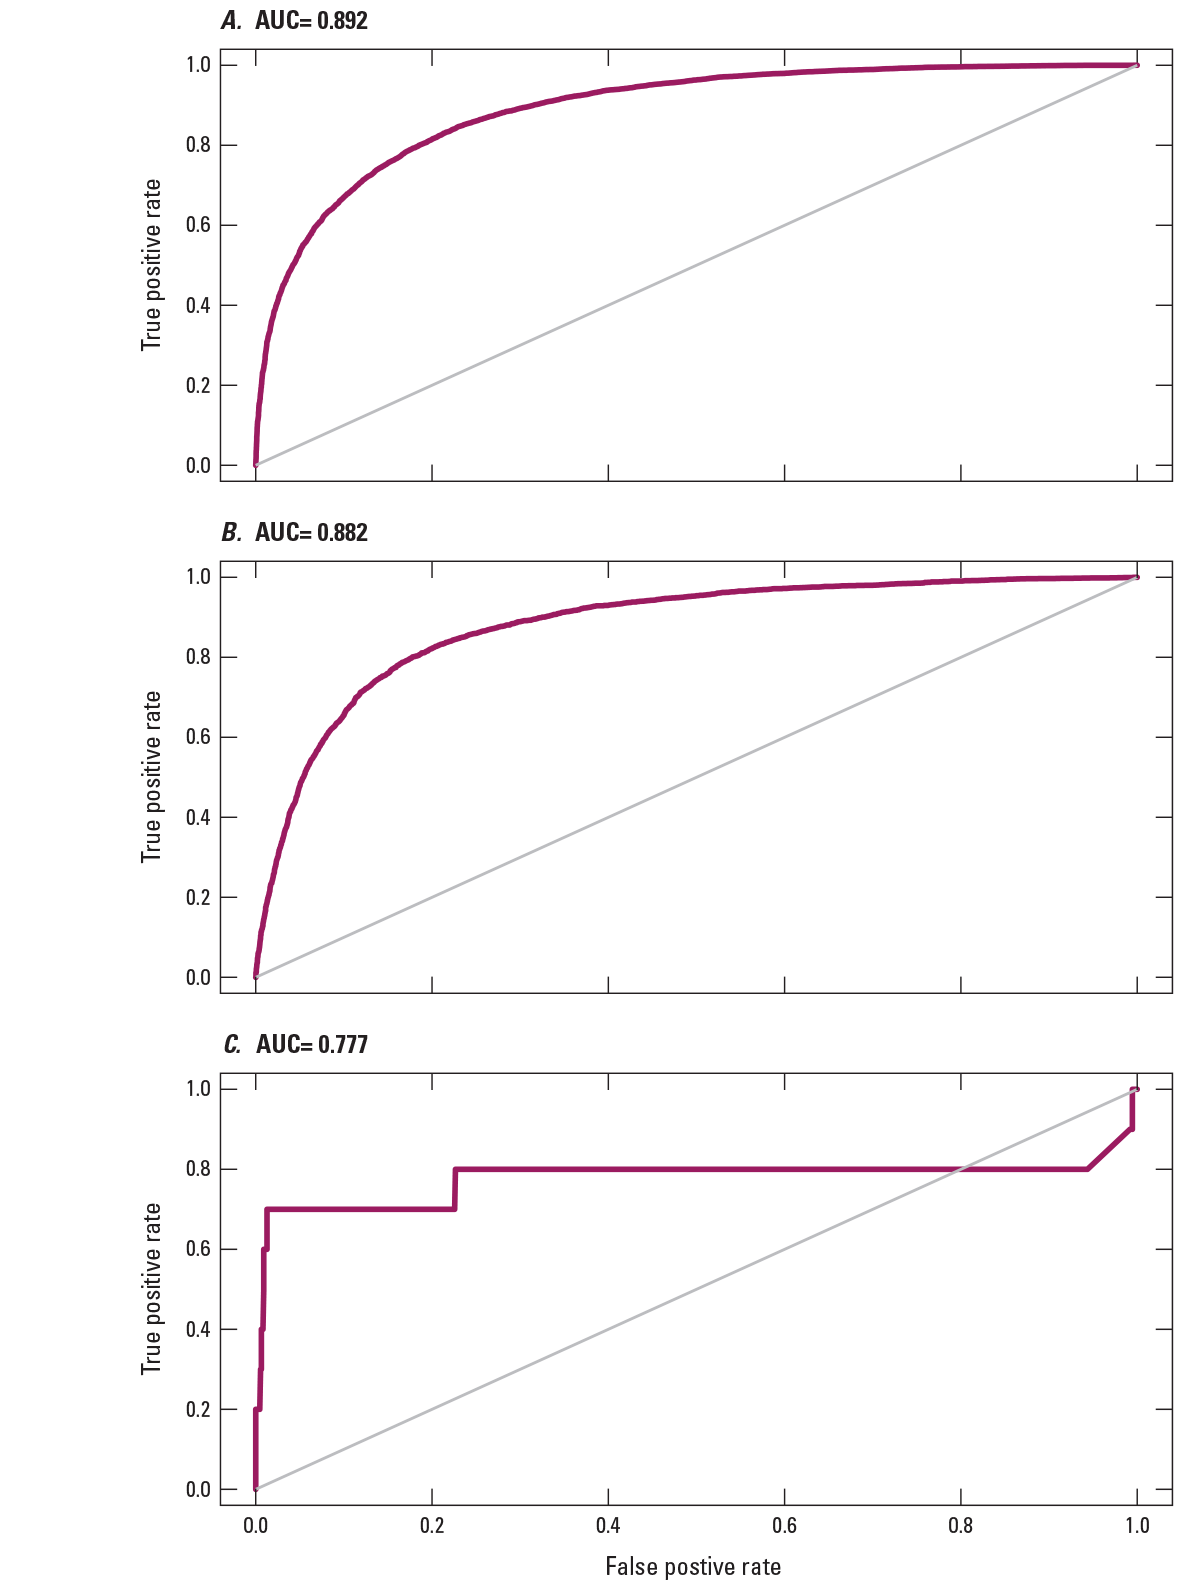 Three graphs, each representing an example modeled species, comparing true positive
                     rates with false positive rates